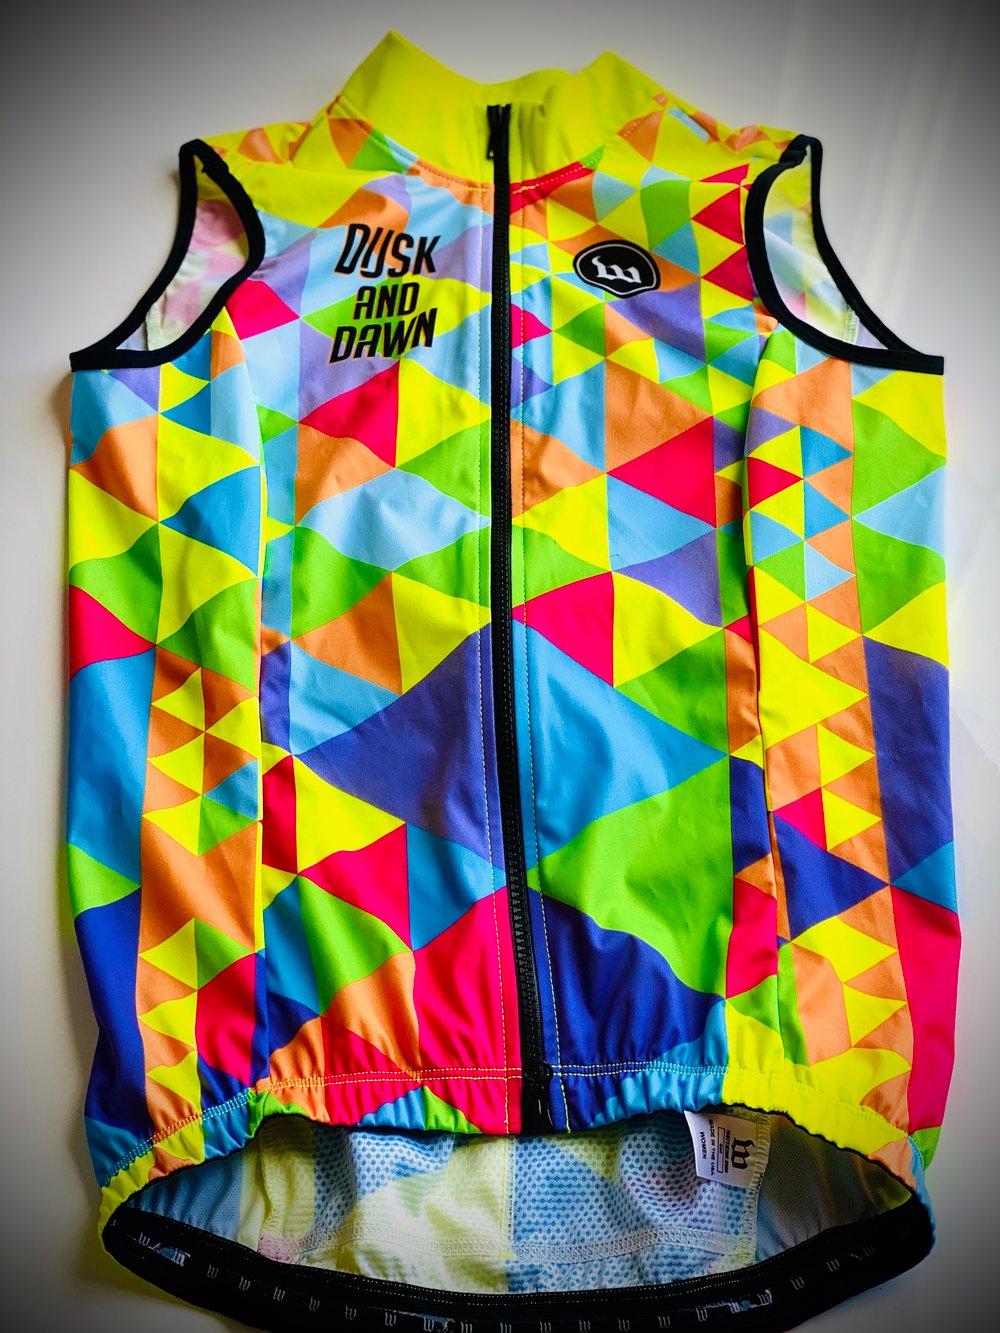 Image of Dusk and Dawn - Women's Cycling Vest